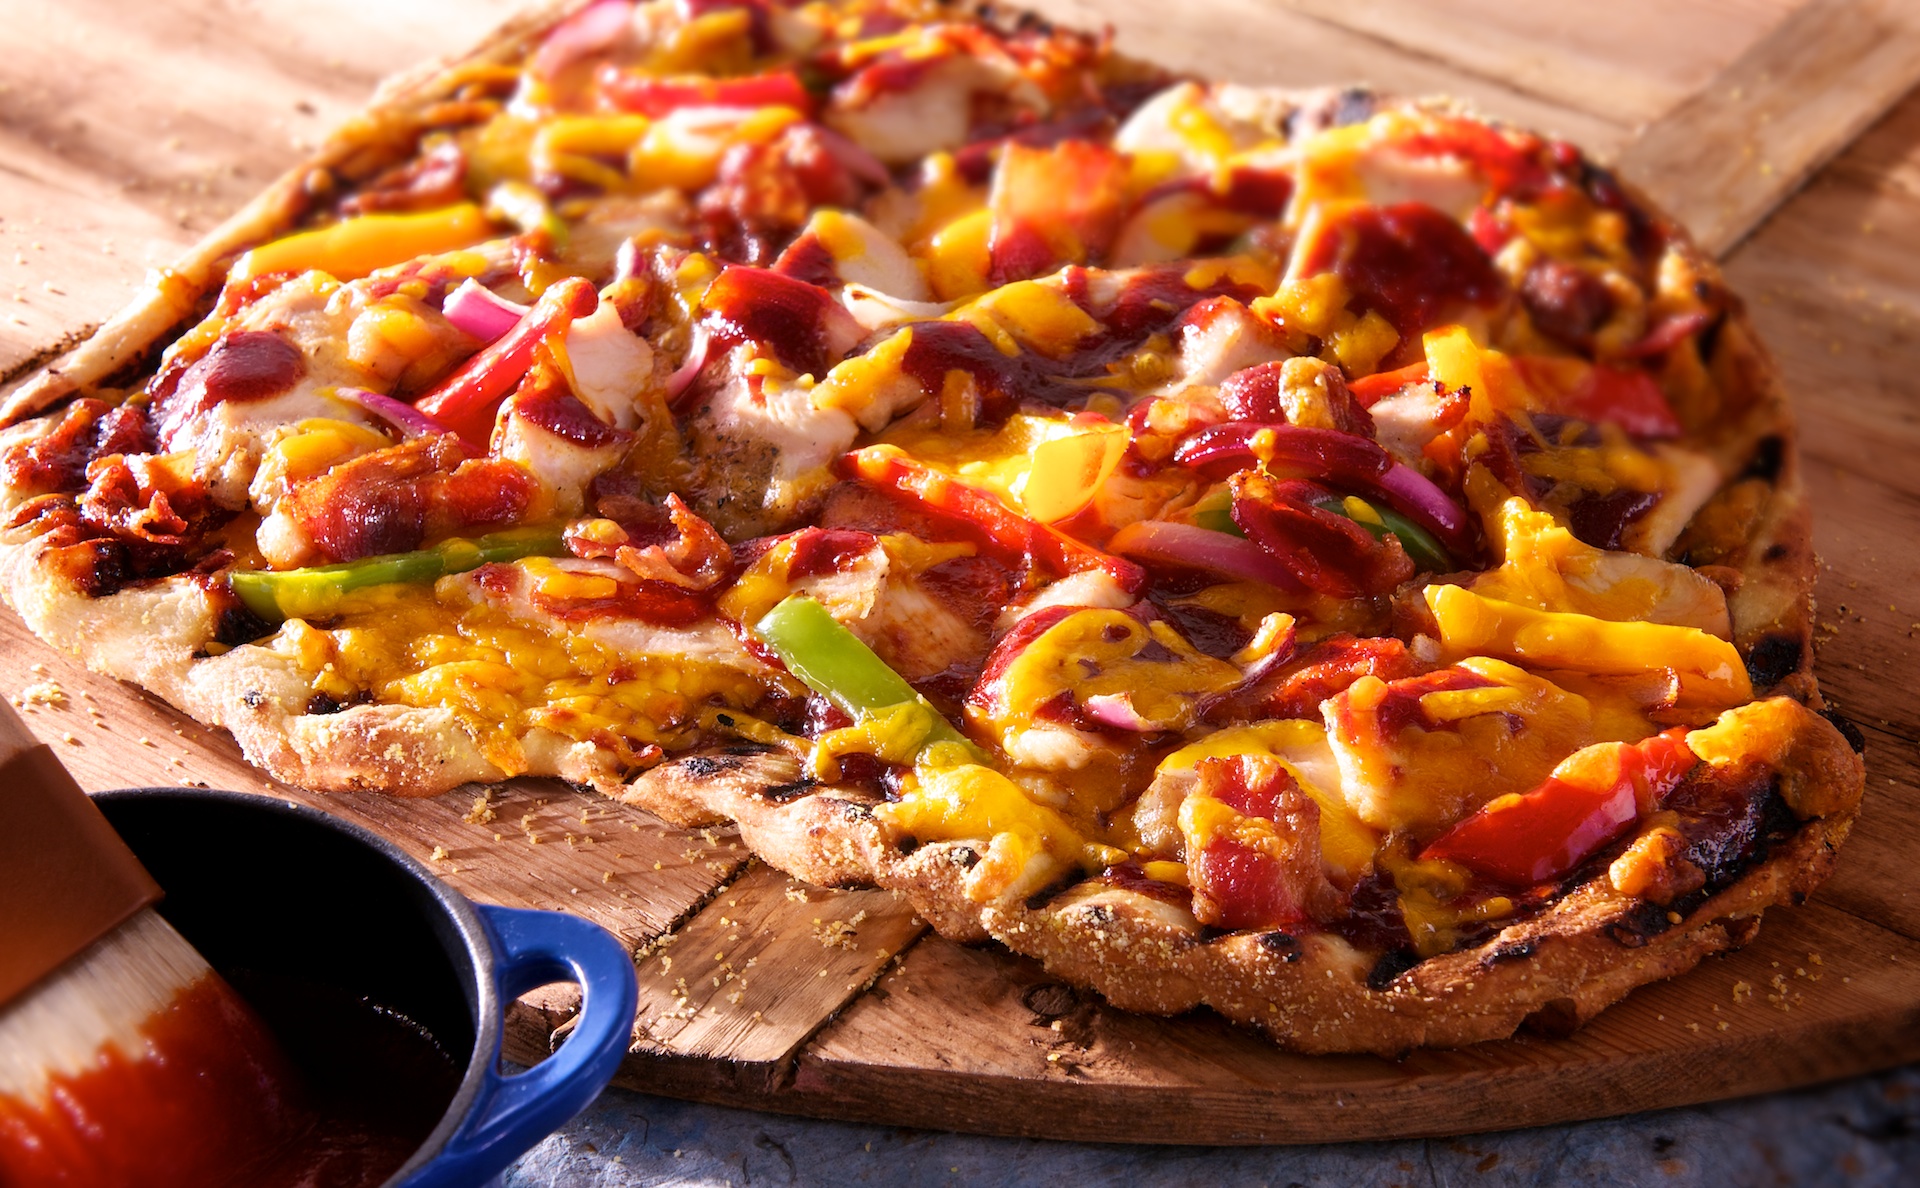 For this classic BBQ grilled pizza, we layered smoky char grilled chicken, bell peppers, red onions, sizzling bacon, barbecue sauce and sharp Cheddar cheese on thin crust pizza dough grilled until golden and bubbly.